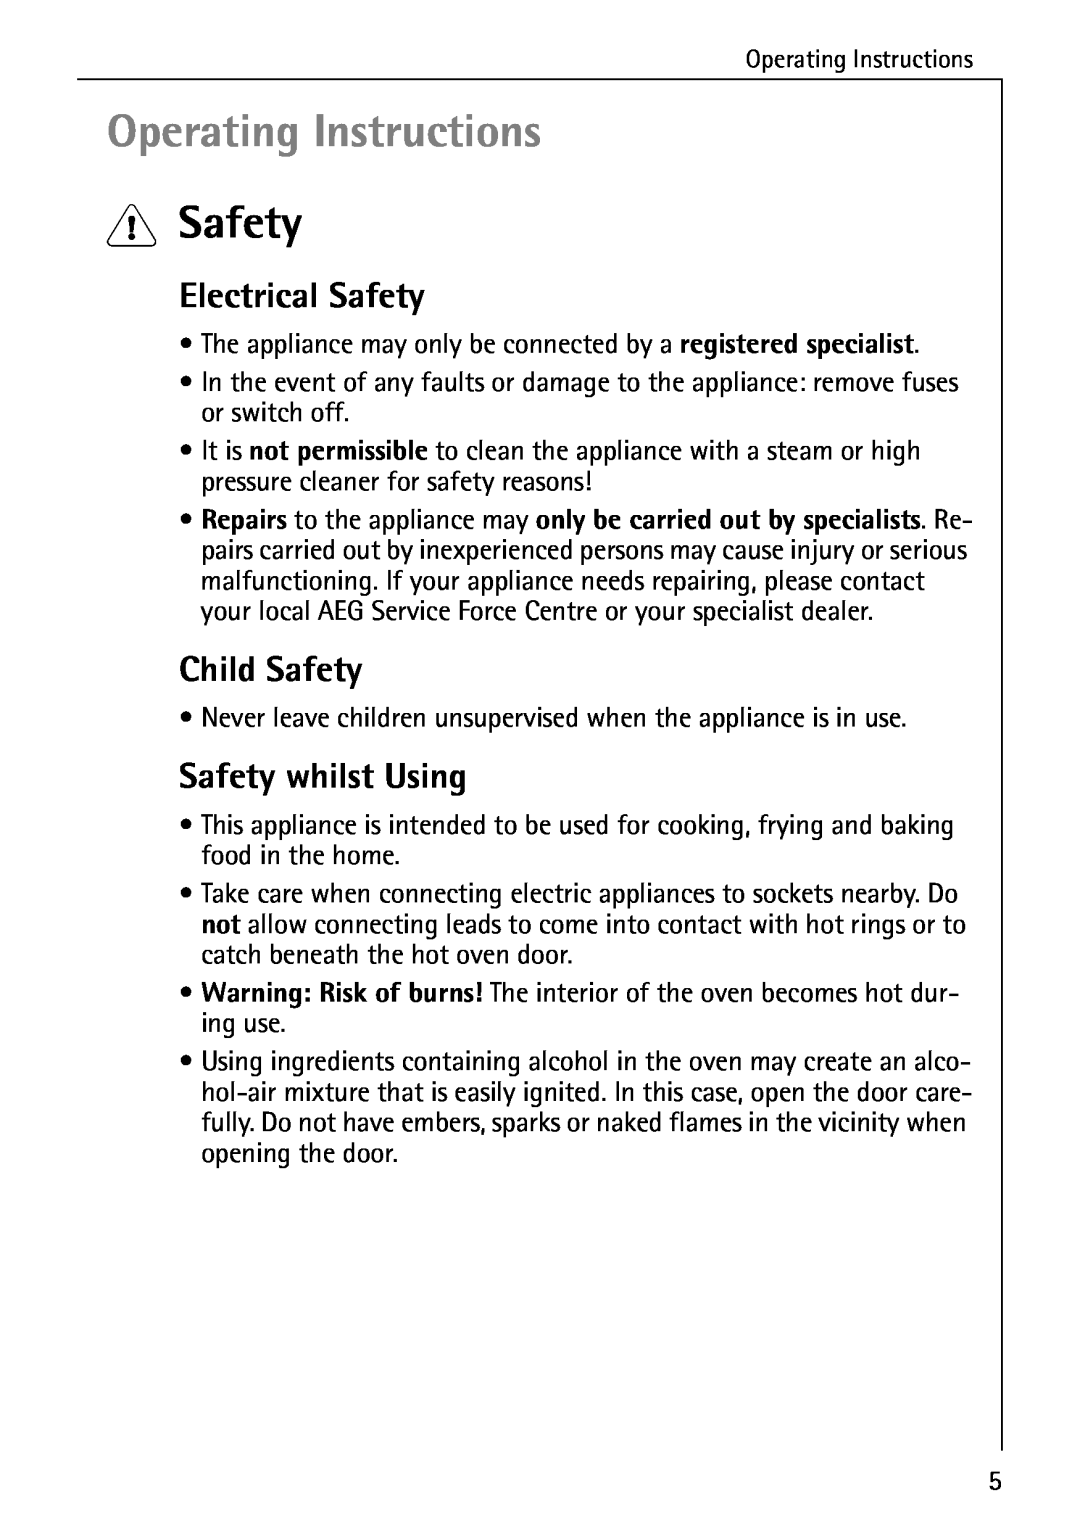 Electrolux B6140-1 manual Operating Instructions, Electrical Safety, Child Safety, Safety whilst Using 